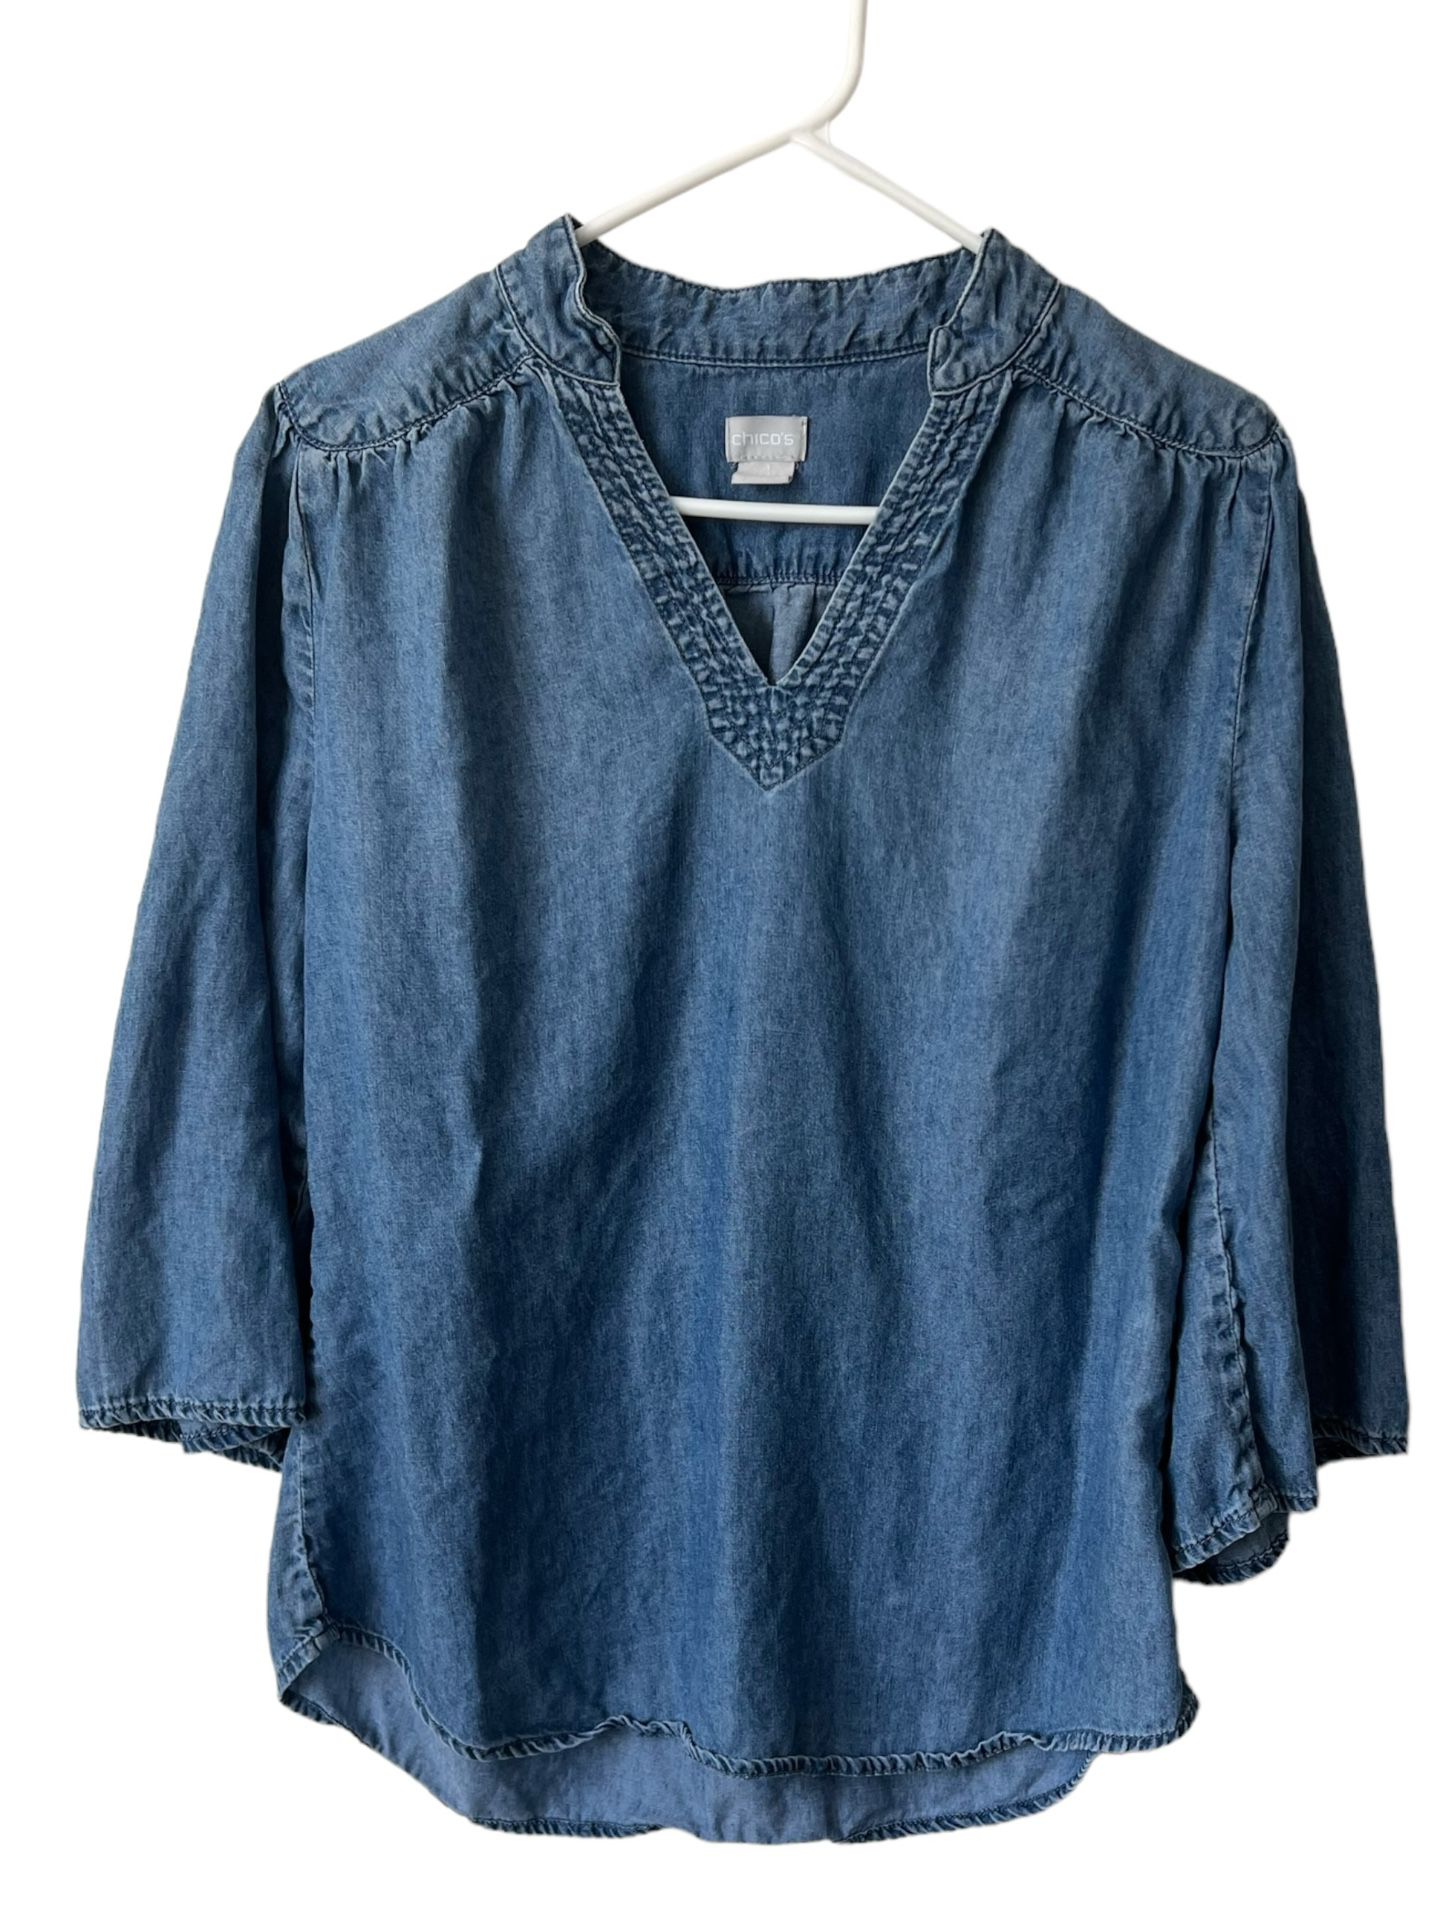 Chico's Linen Blend Chambray Top Blouse Size 2 ( L) Blue 3/4 Sleeve V- Neck .  Comes from a pet and smoke free home.  Measurements are in the pictures